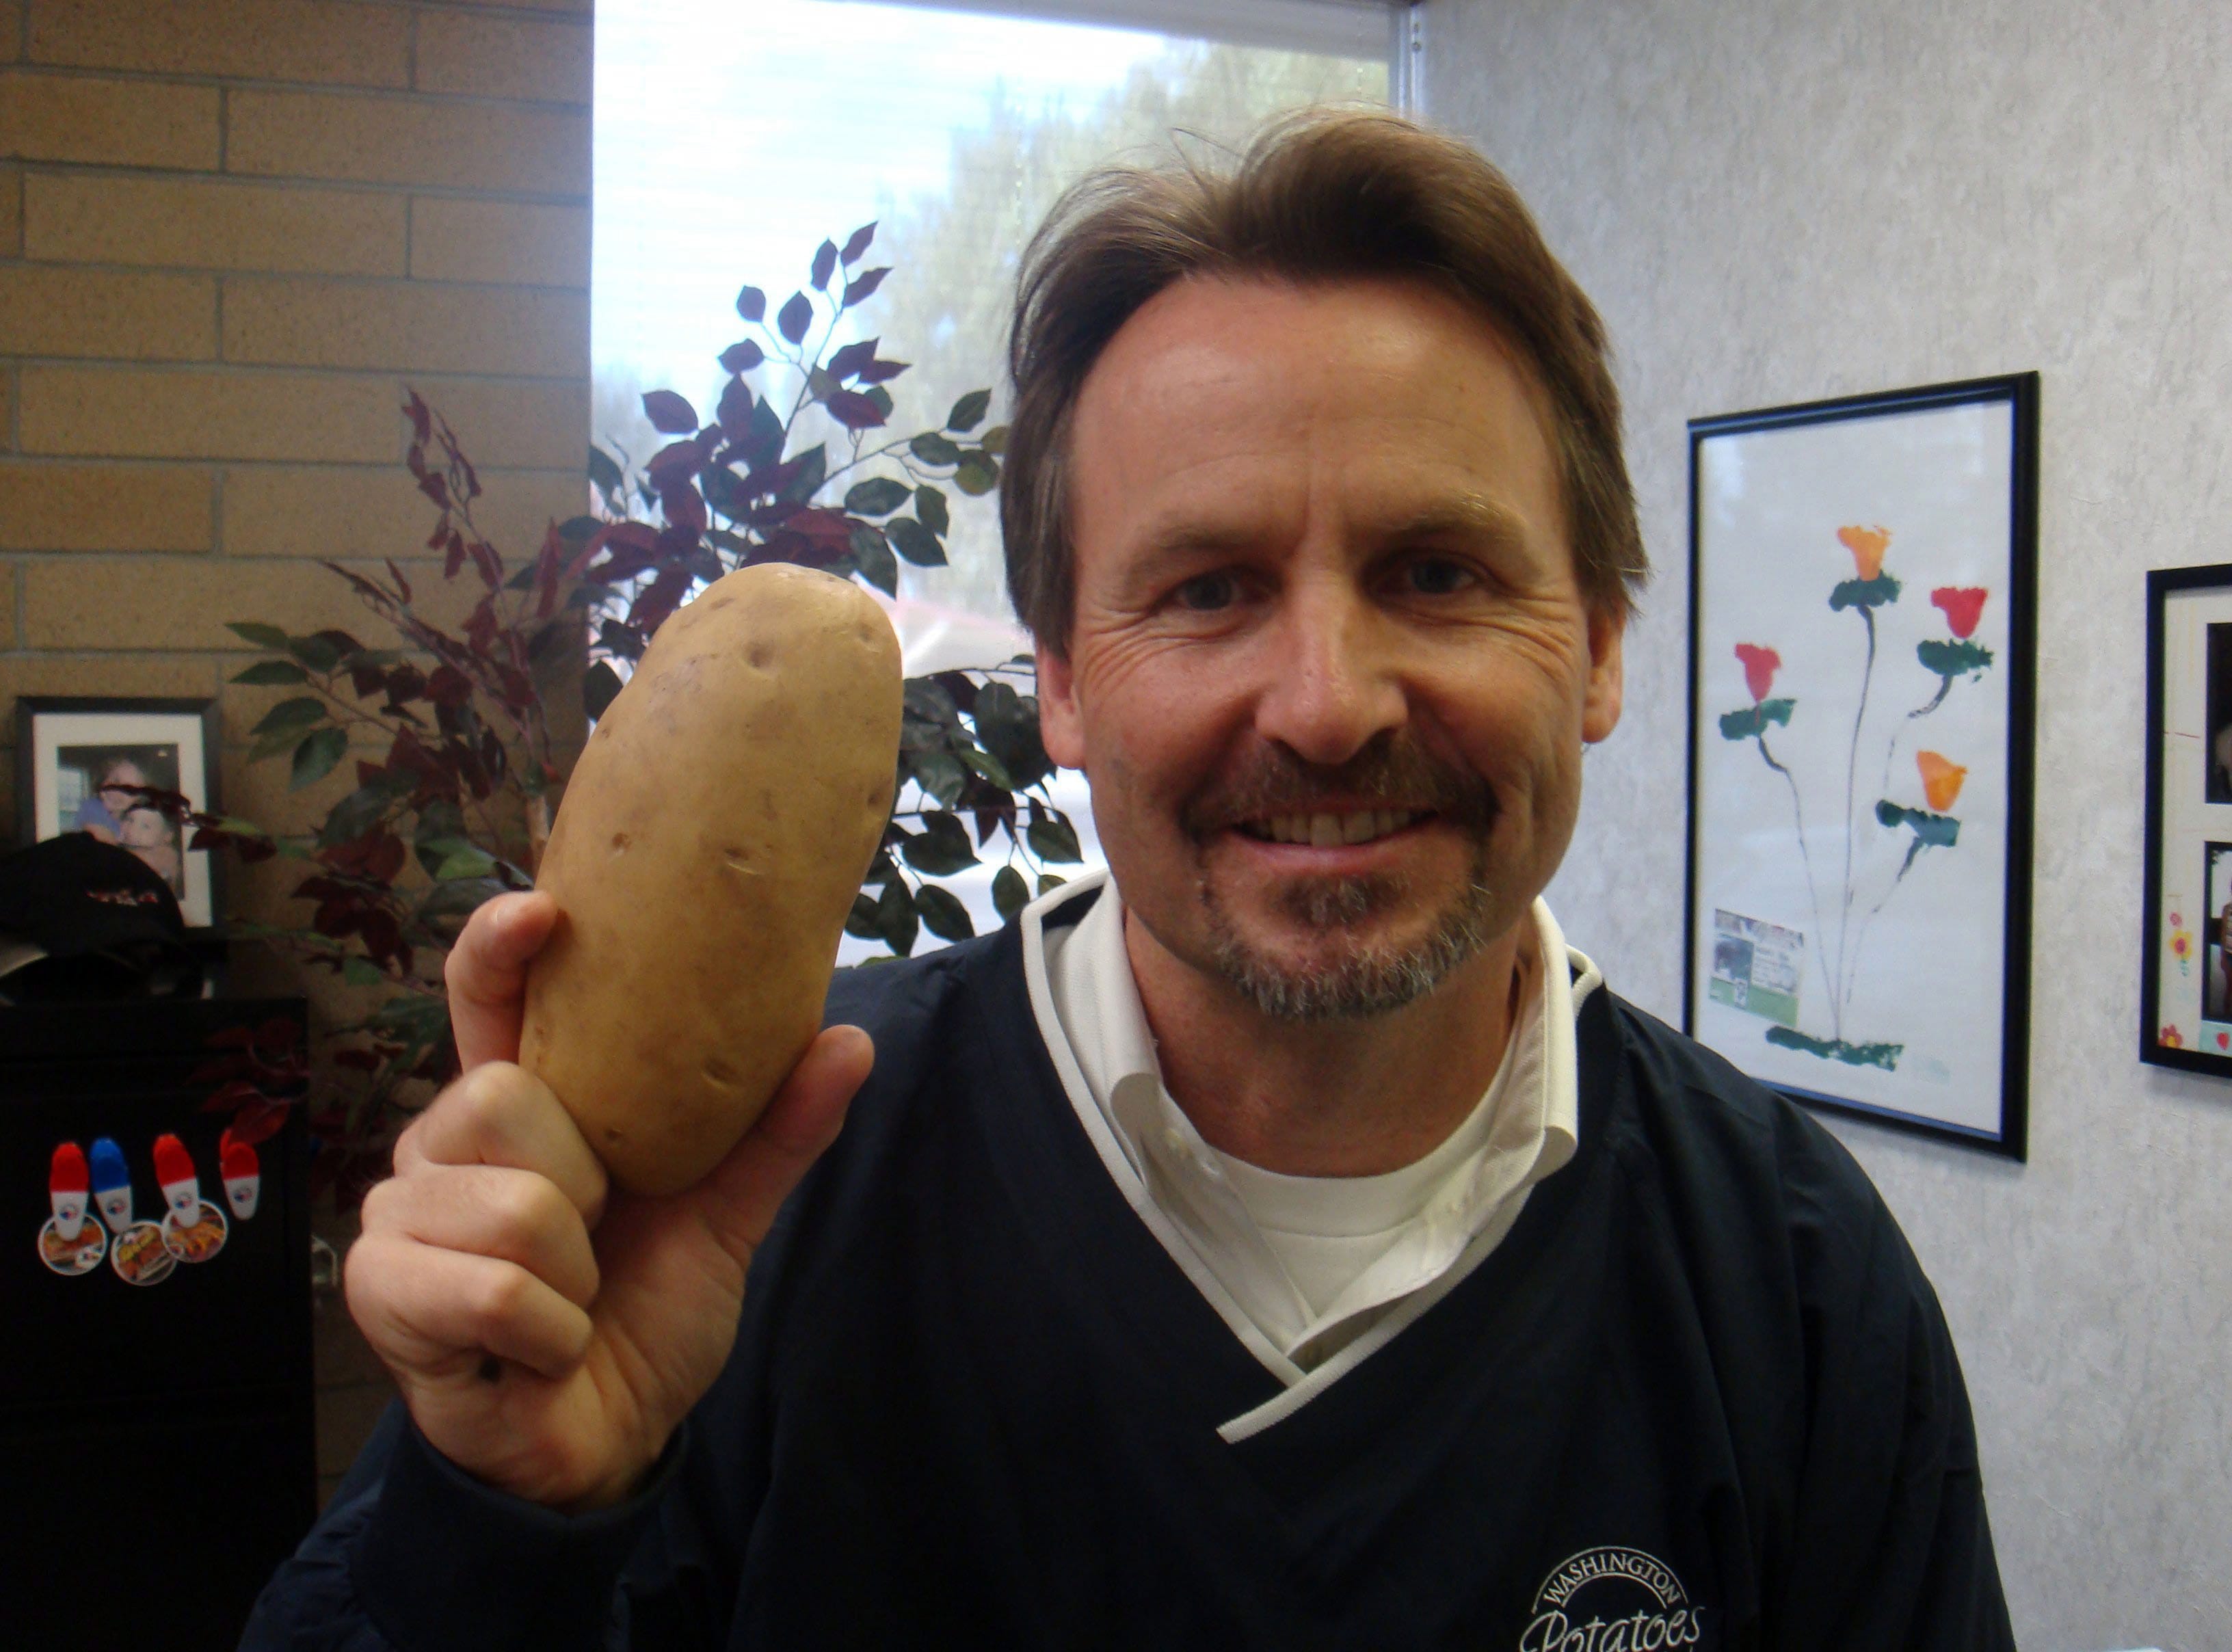 Tri-City Herald
Chris Voigt, executive director of the Washington State Potato Commission, once ate 20 potatoes a day for 60 straight days. He wants the federal government to make it easier for poor children to eat white potatoes.